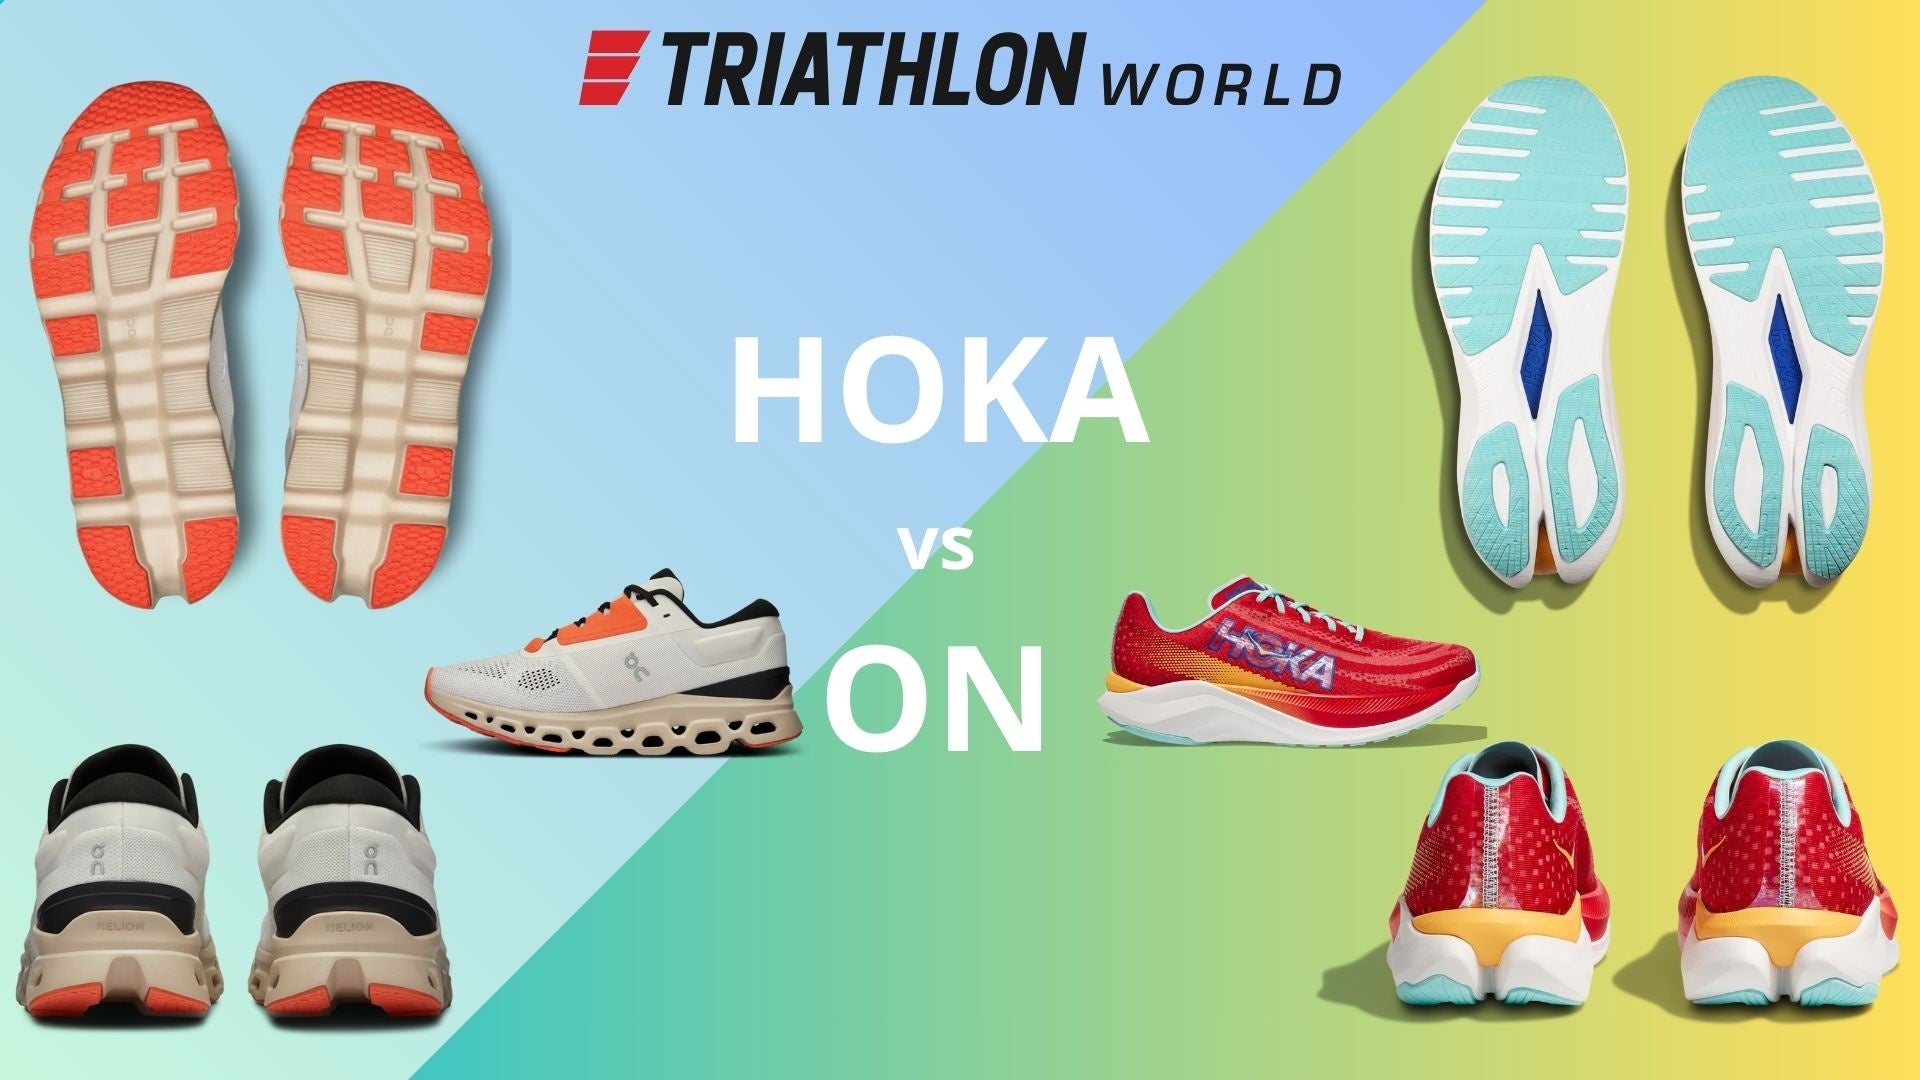 Hoka vs On: The difference in sole and cushioning